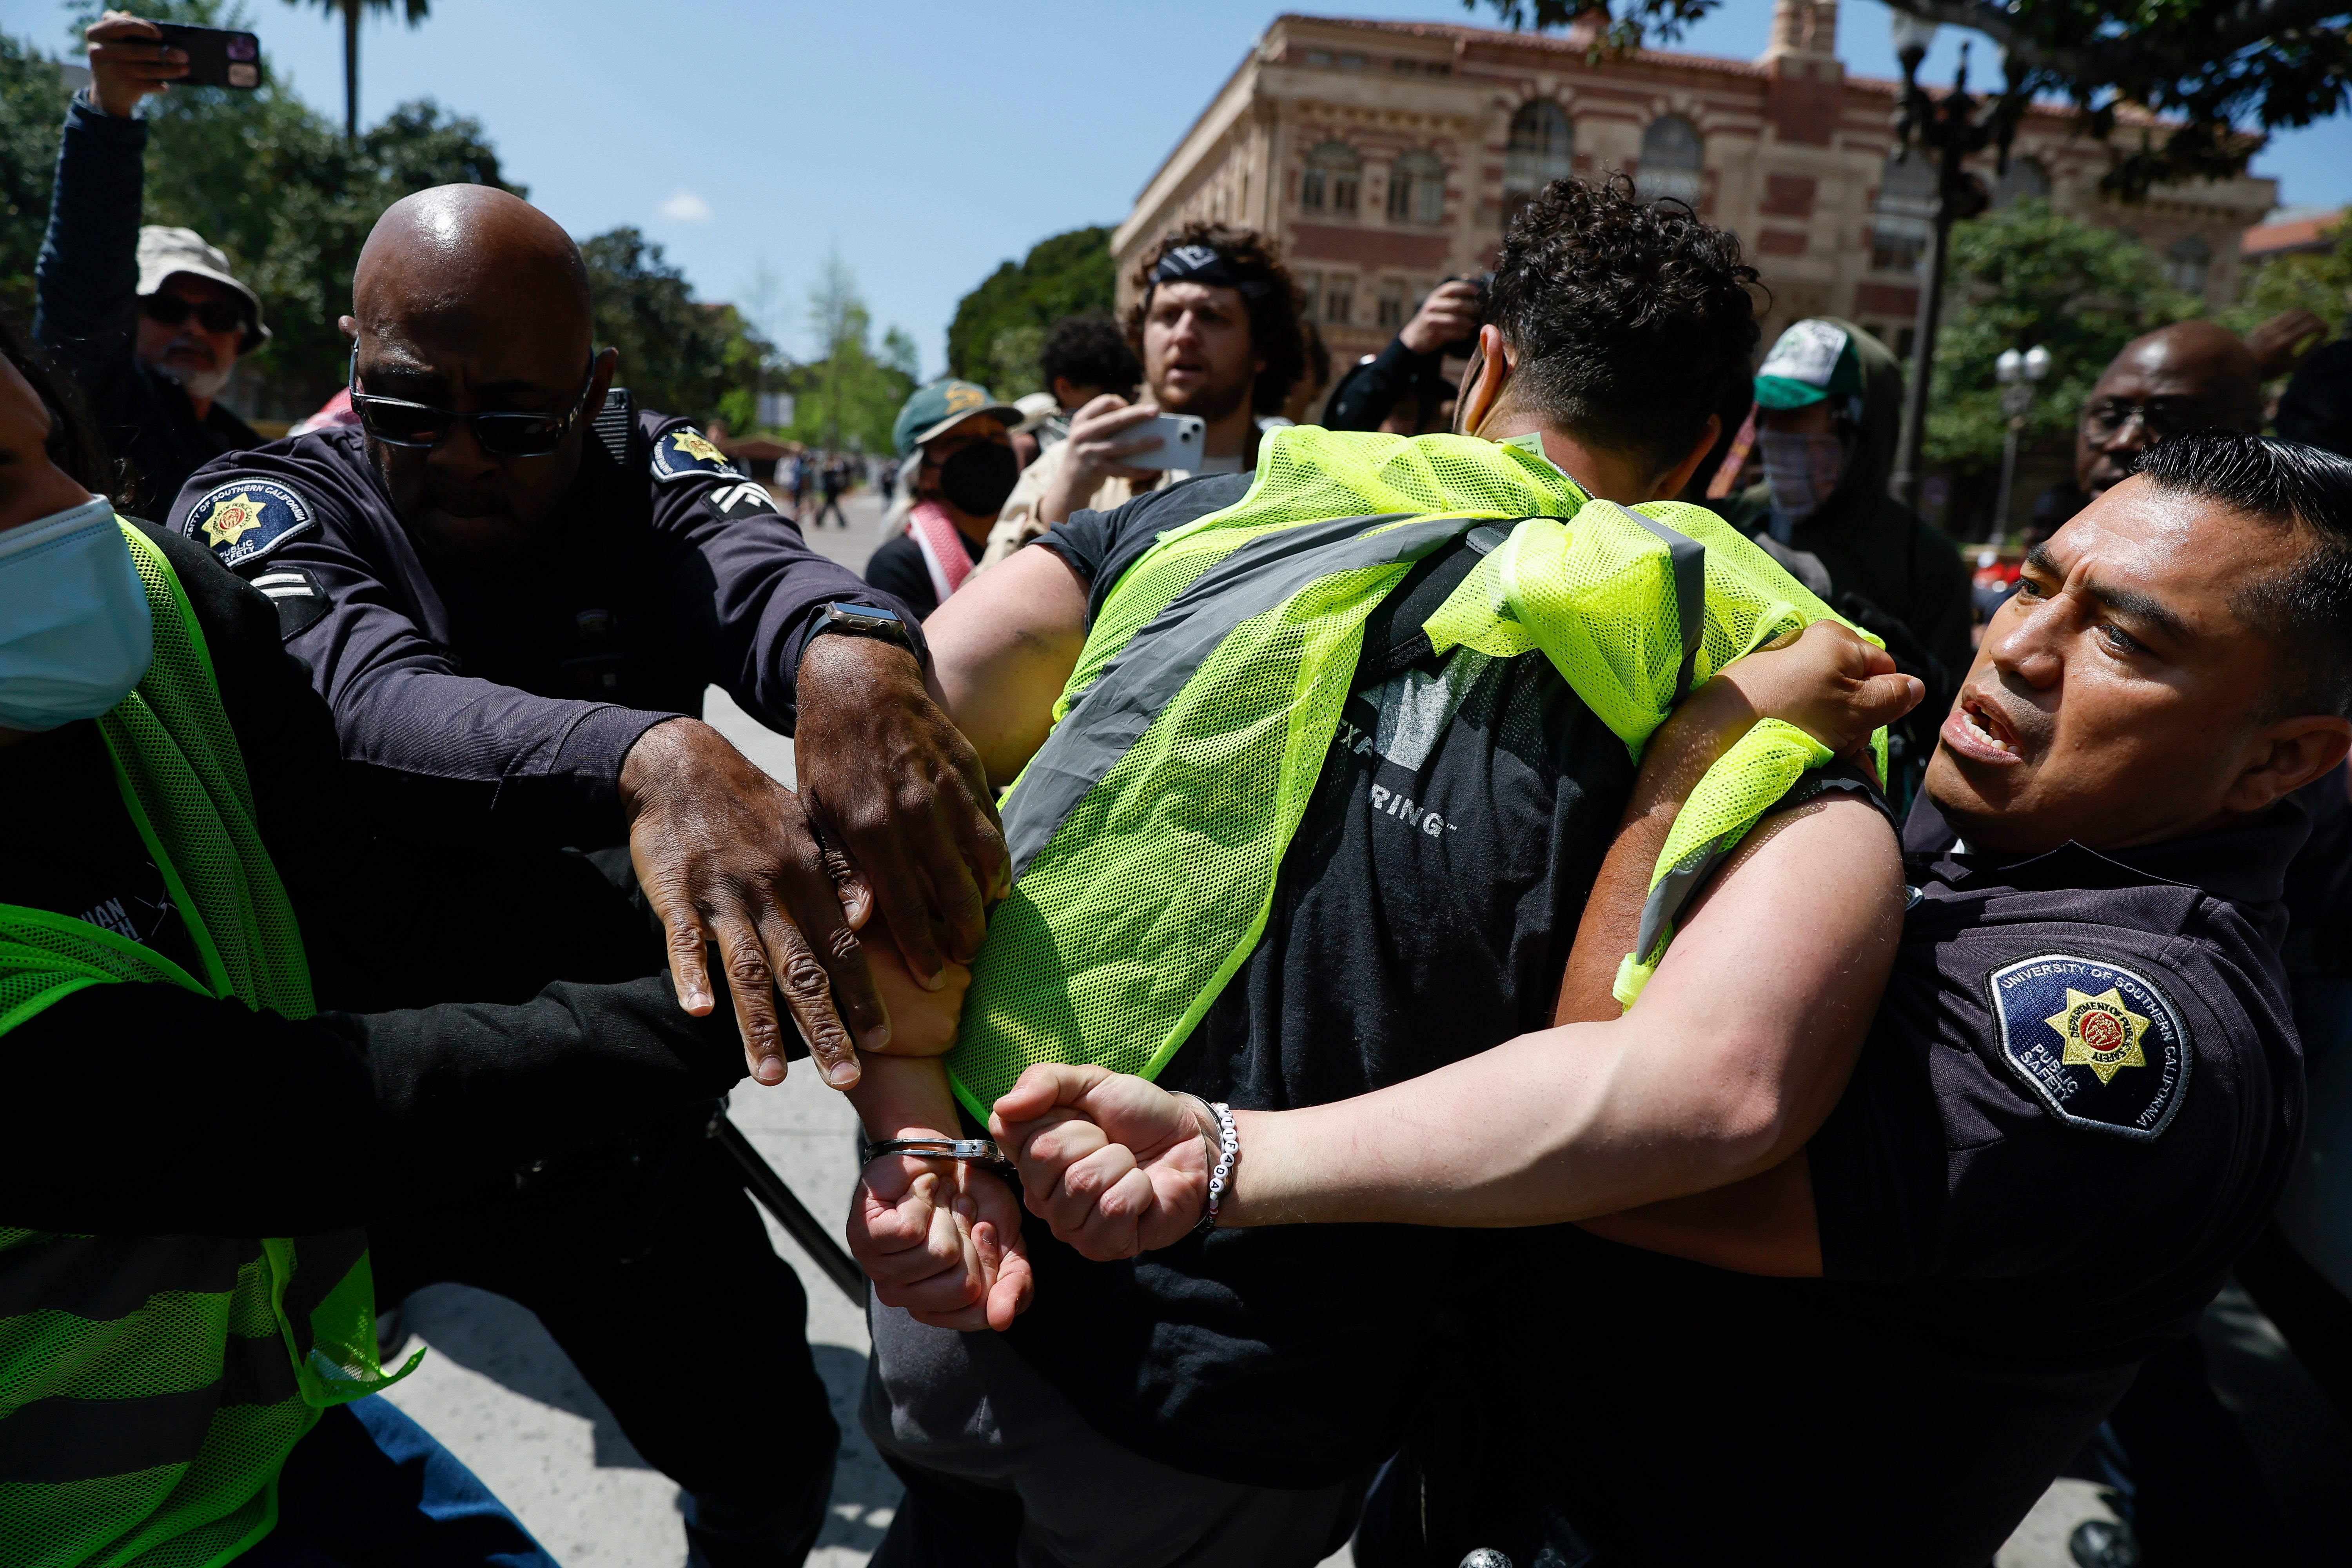 USC Public Safety Officers detain a protester during a Gaza solidarity occupation on campus to advocate for Palestine in Los Angeles, California